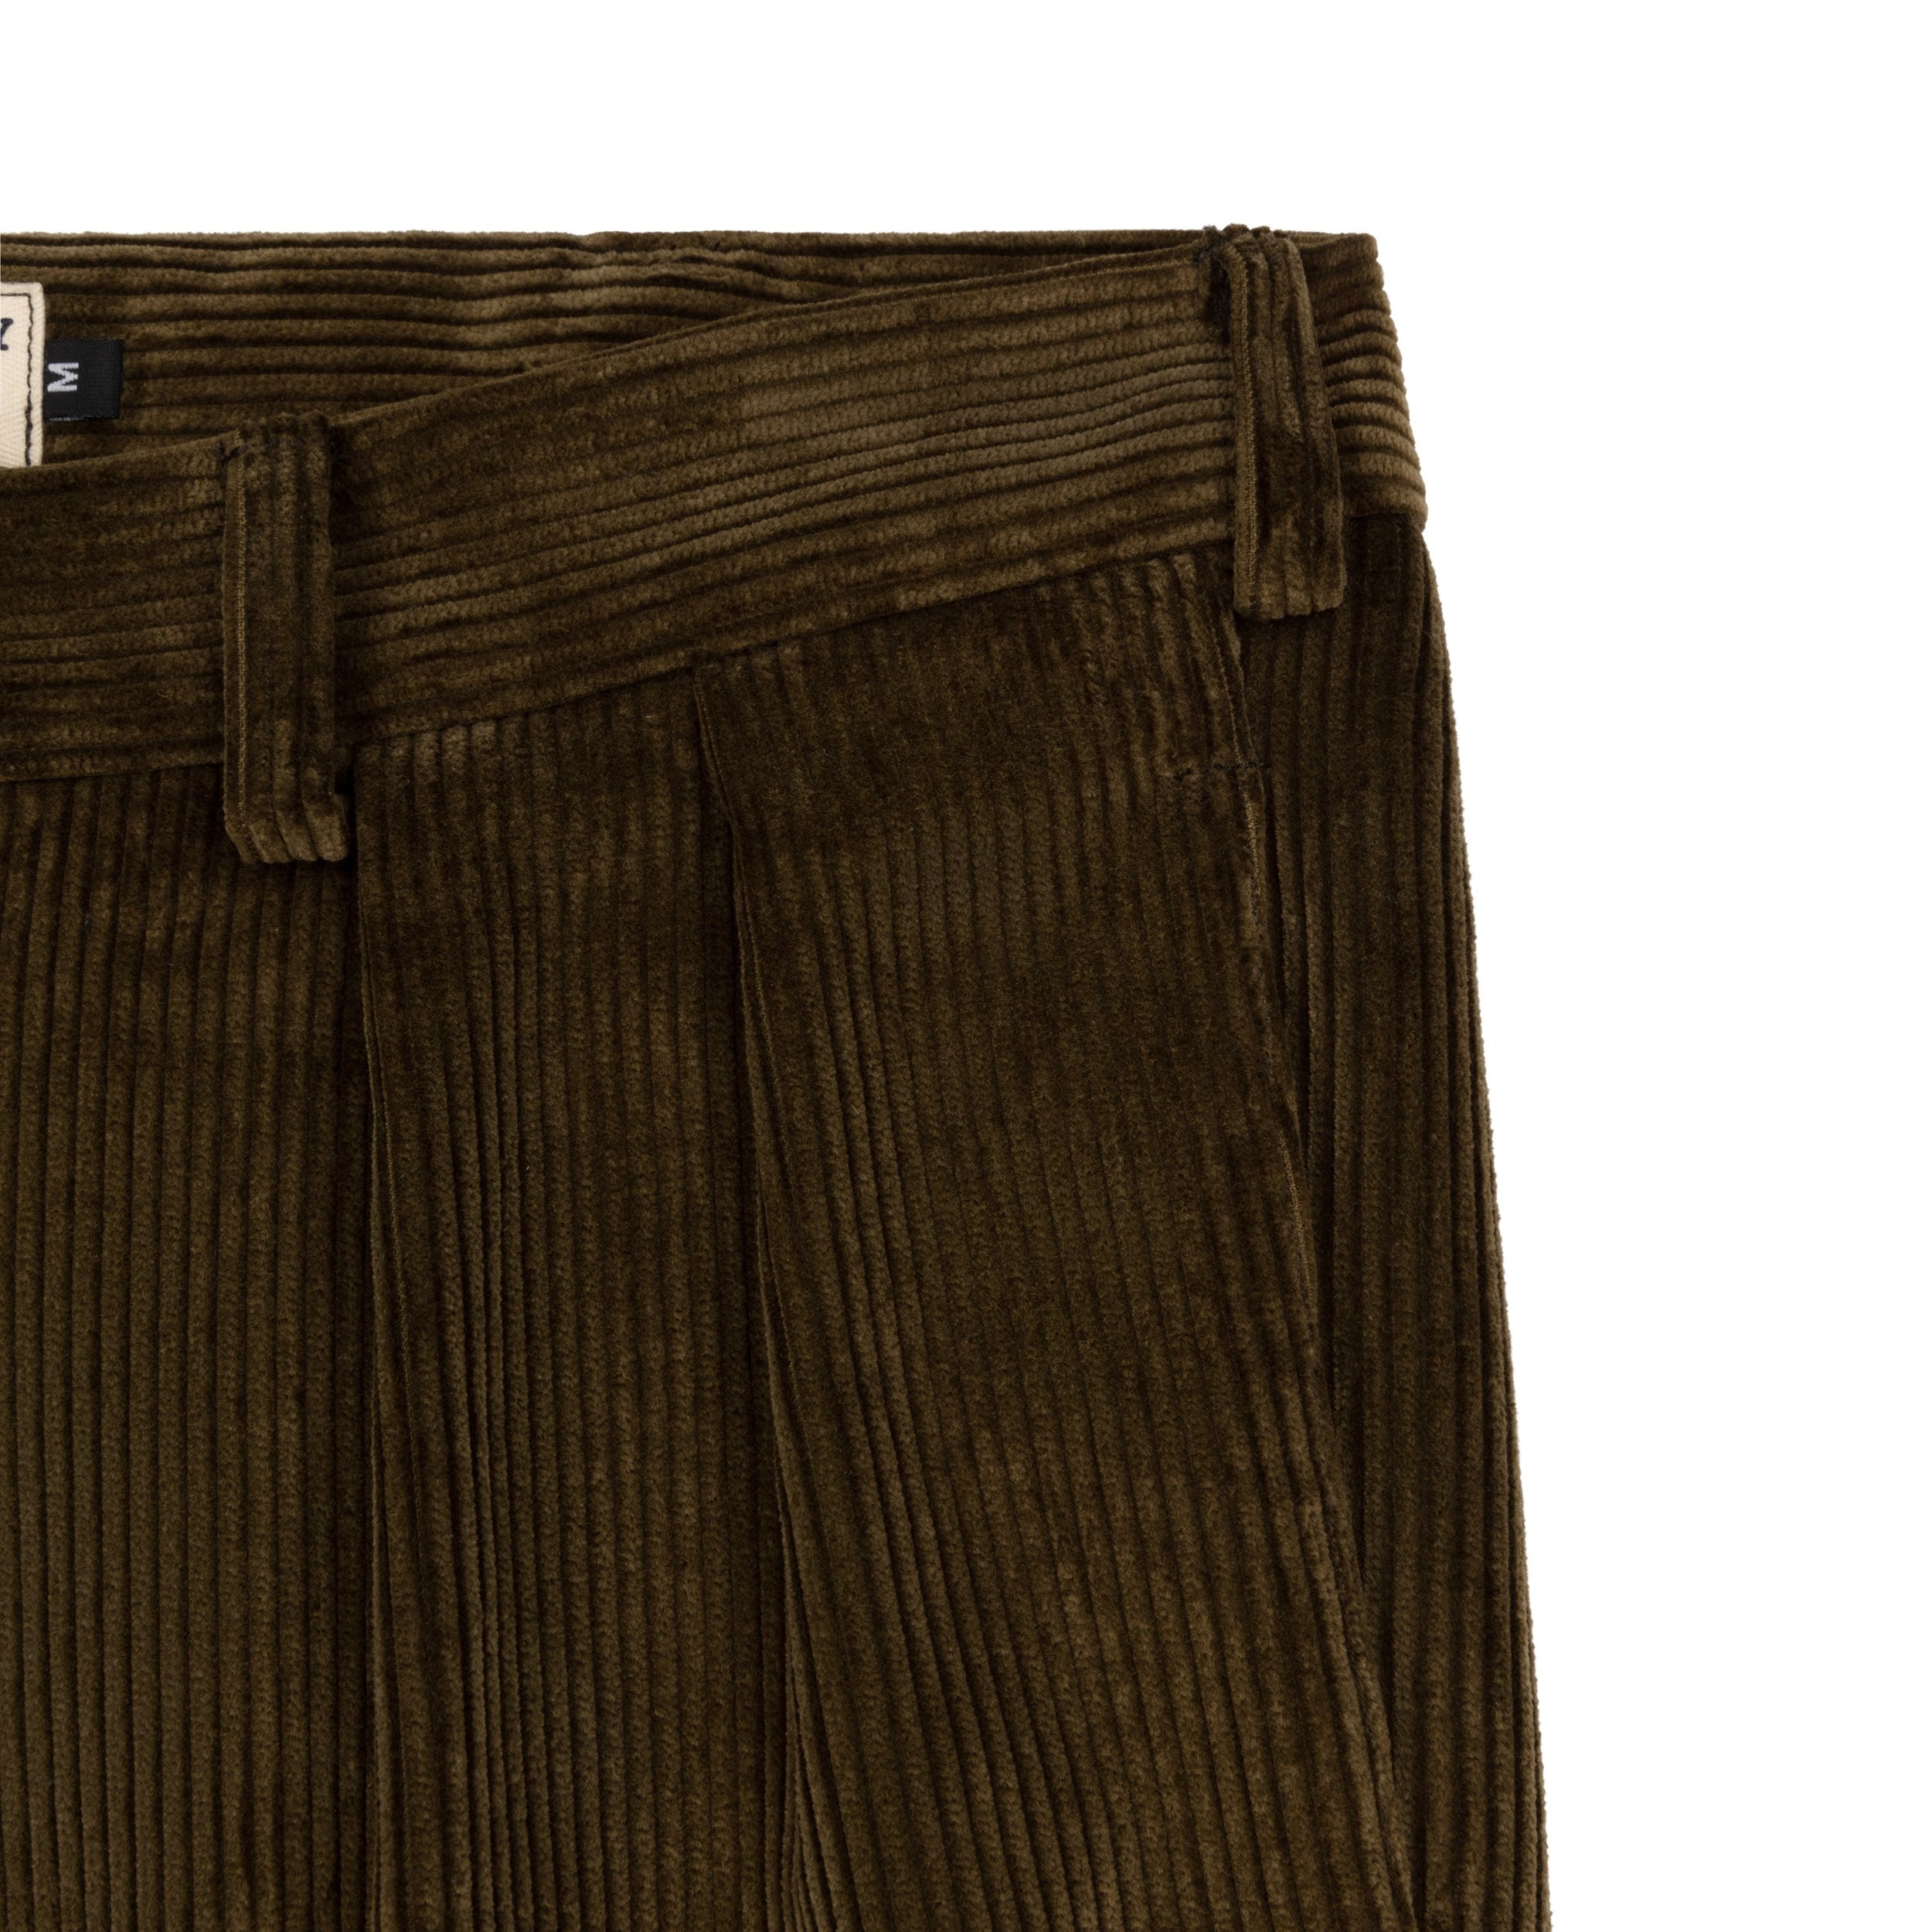 Carrier Company Classic Trouser in Corduroy